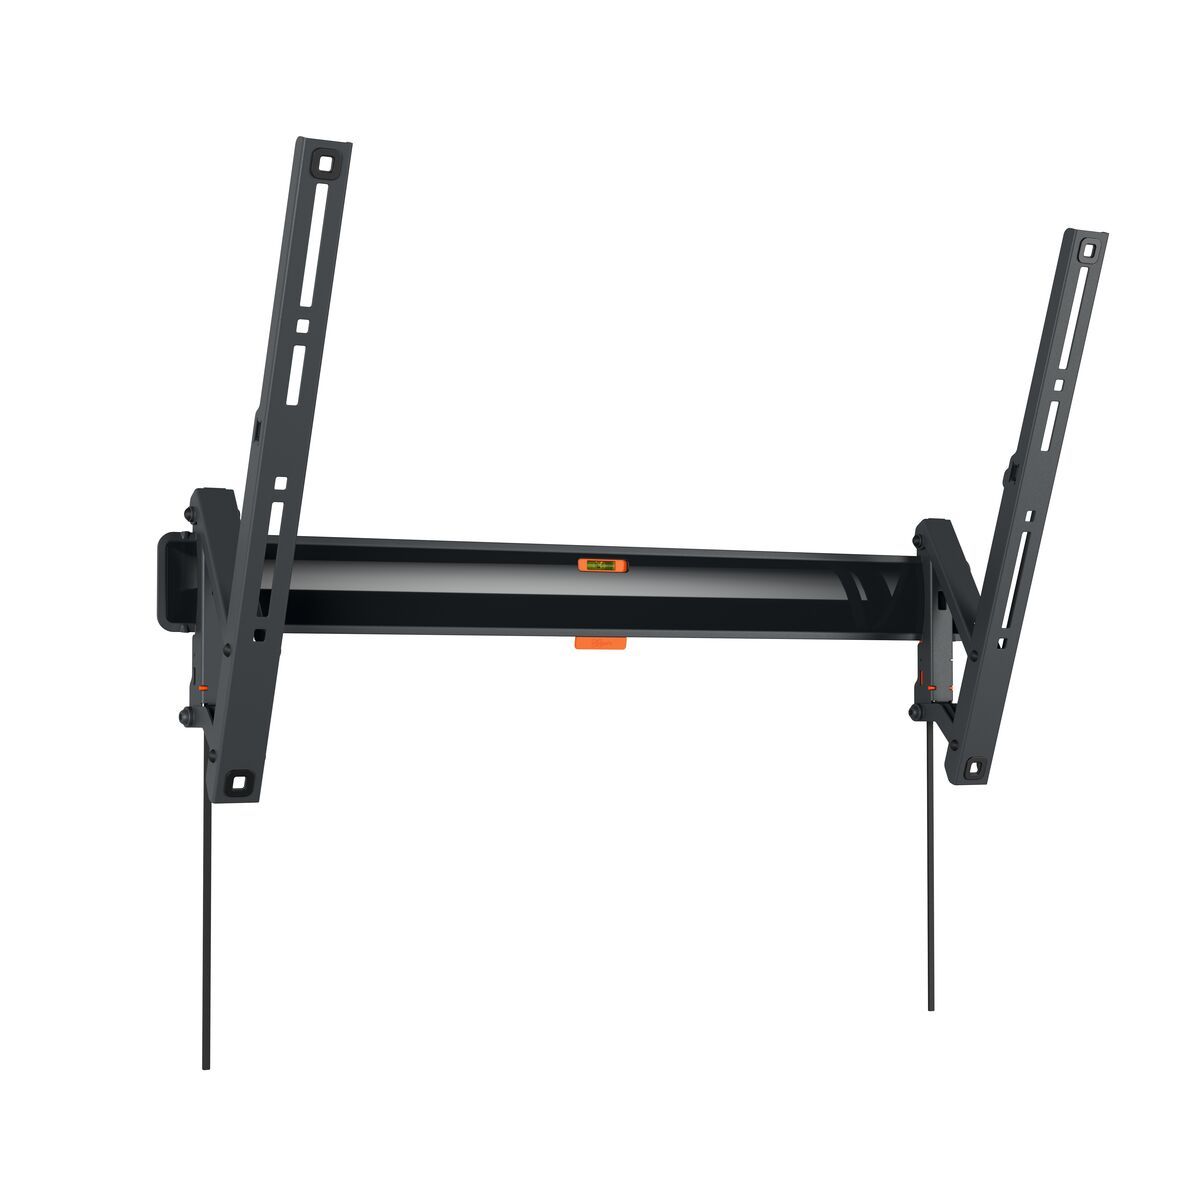 Vogel's TVM 3613 Tilting TV Wall Mount - Suitable for 40 up to 77 inch TVs - Tilt up to 20° - Product